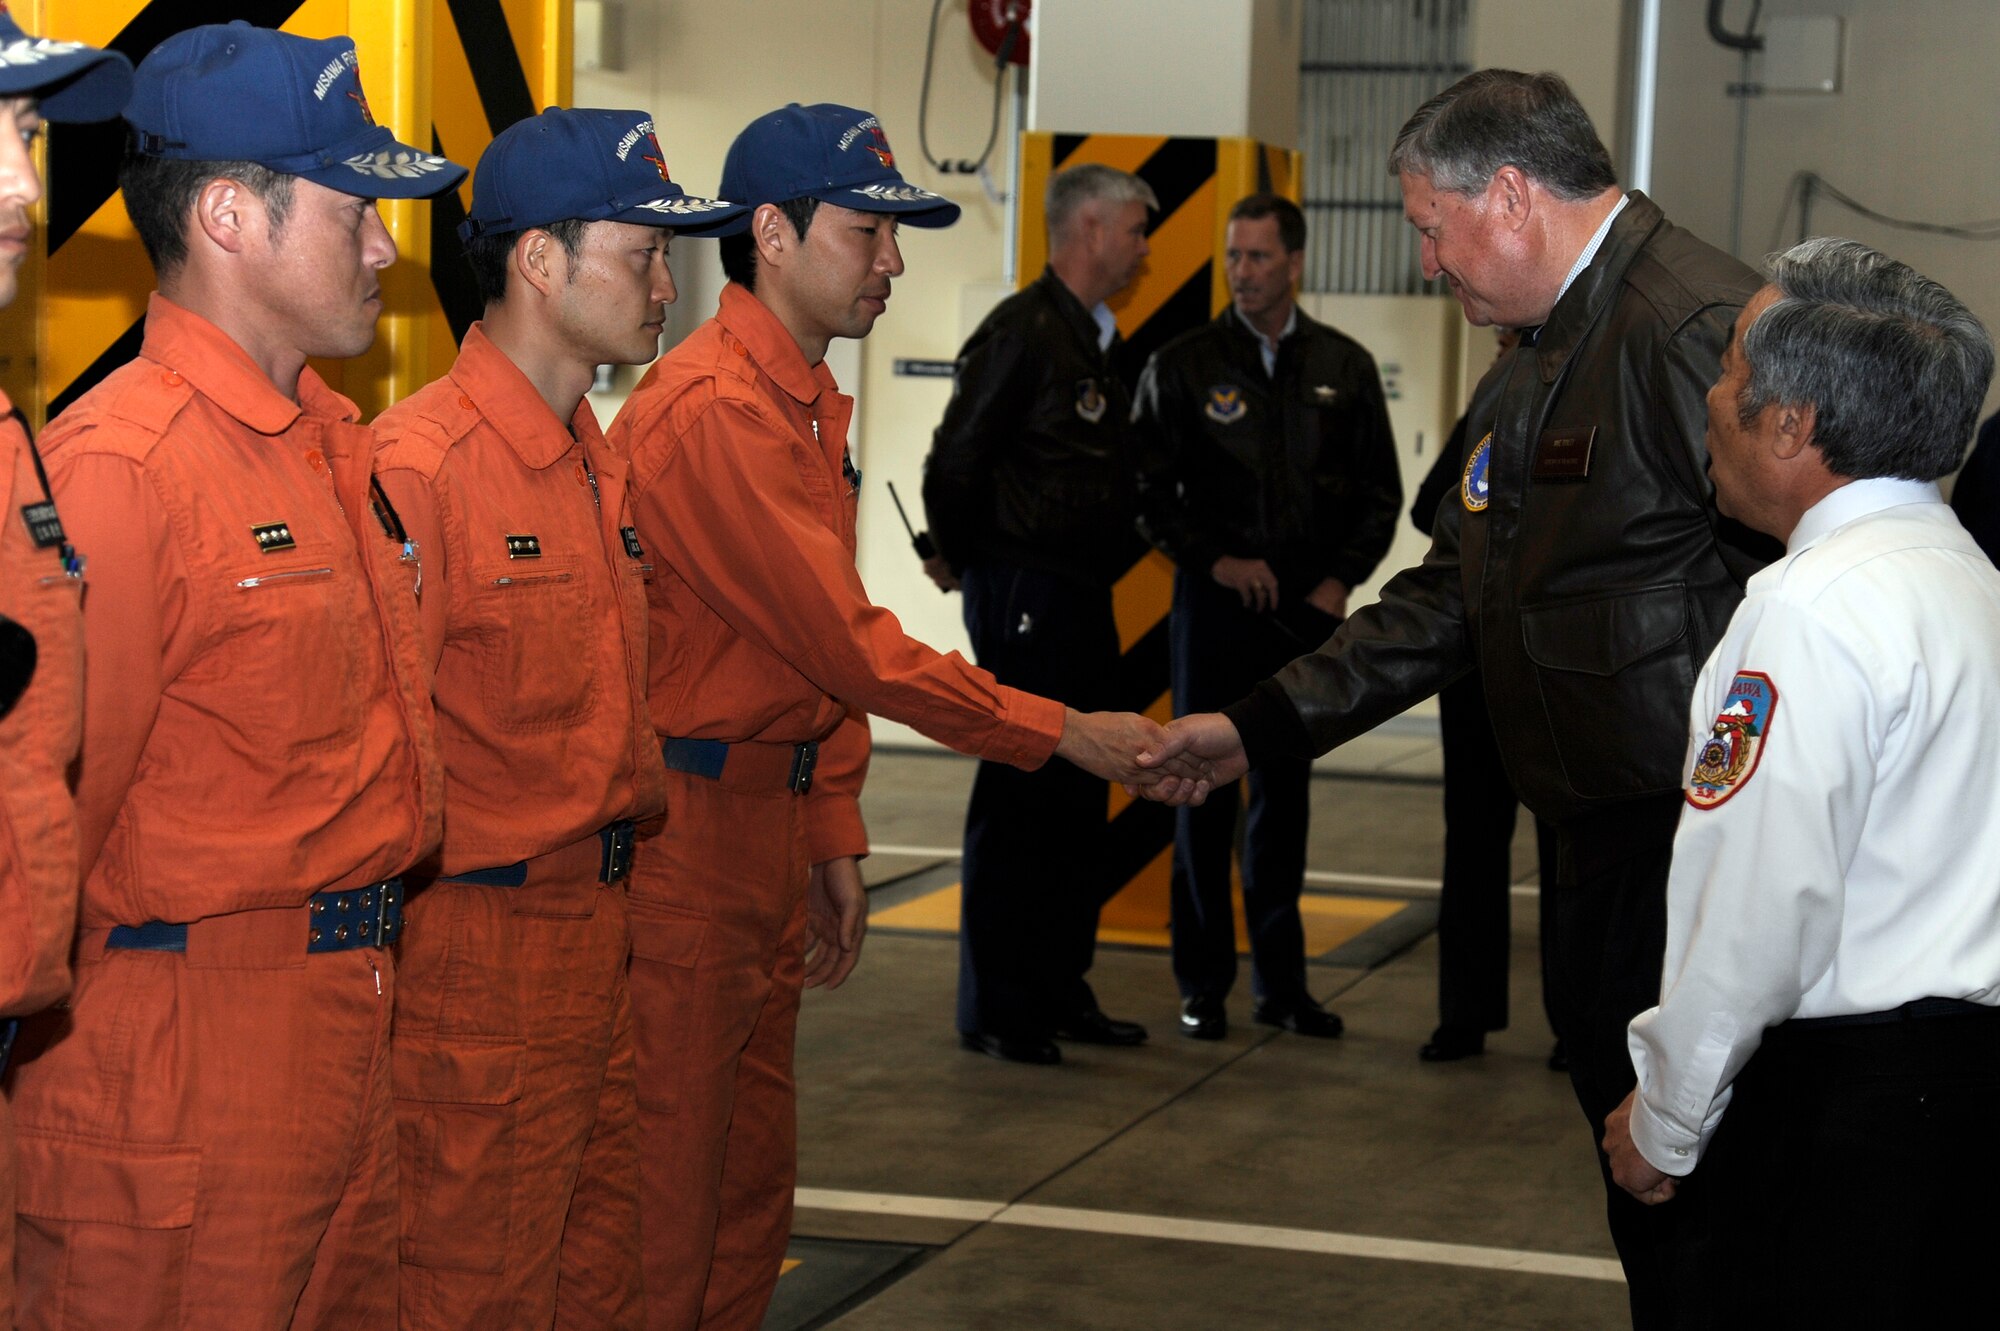 Secretary of the Air Force Michael Donley meets members of the Misawa Fire Department during a visit to Fire Station 1 at Misawa Air Base, Japan, April 23, 2012. During his visit, Fire Station 1 showcased their bilateral relationship with the local Japanese fire department.  While at Misawa, Donley met with Airmen and toured various base facilities. (U.S. Air Force photo/Tech. Sgt. Marie Brown/Released)

